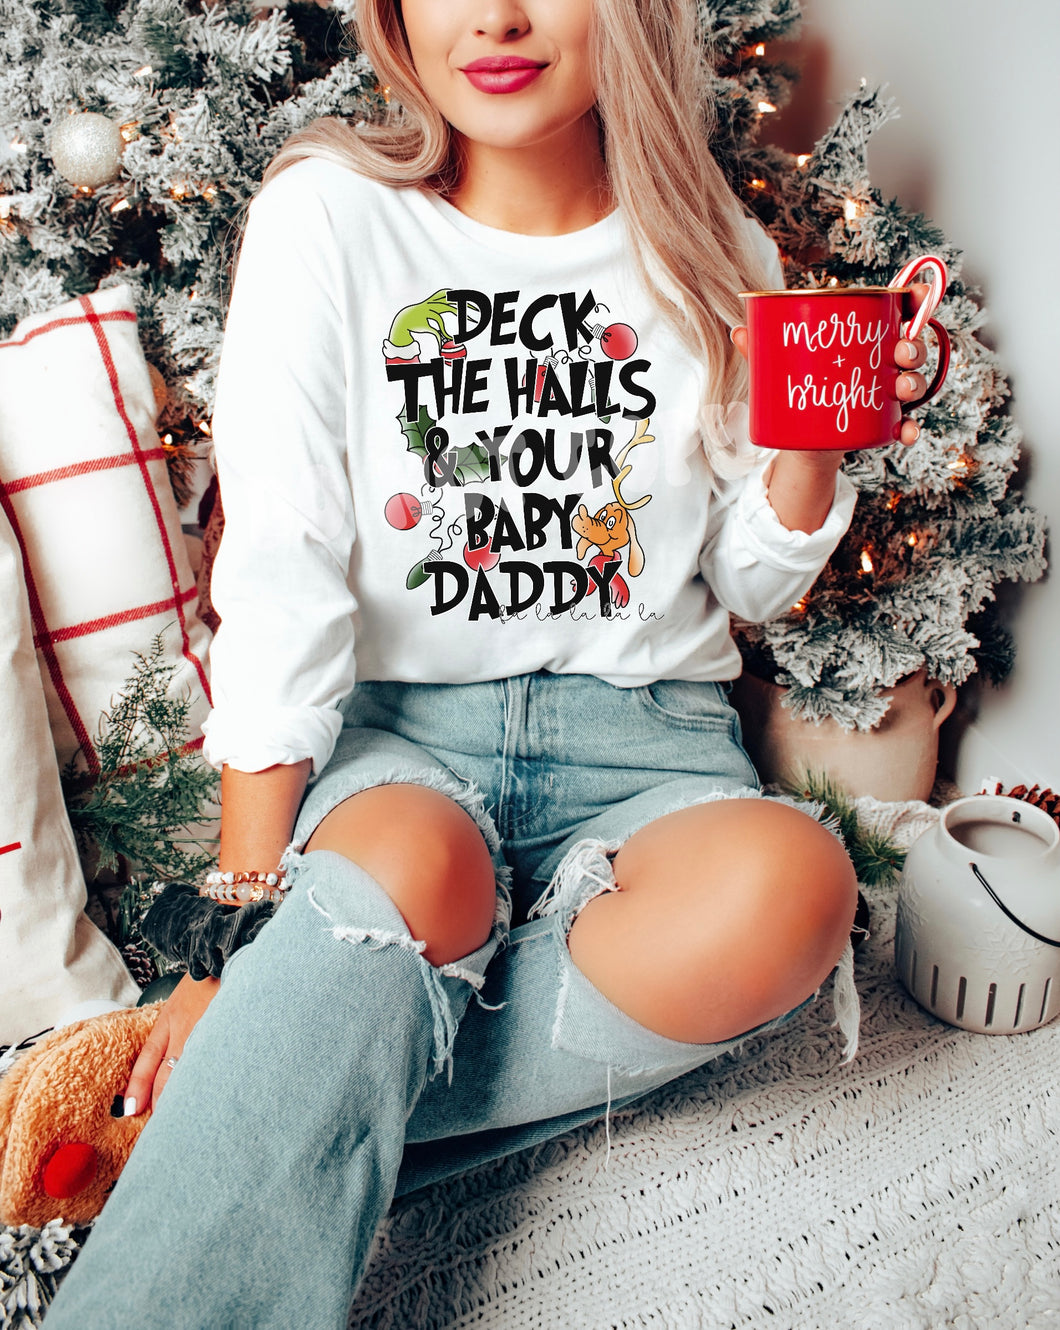 Deck the halls & your baby daddy